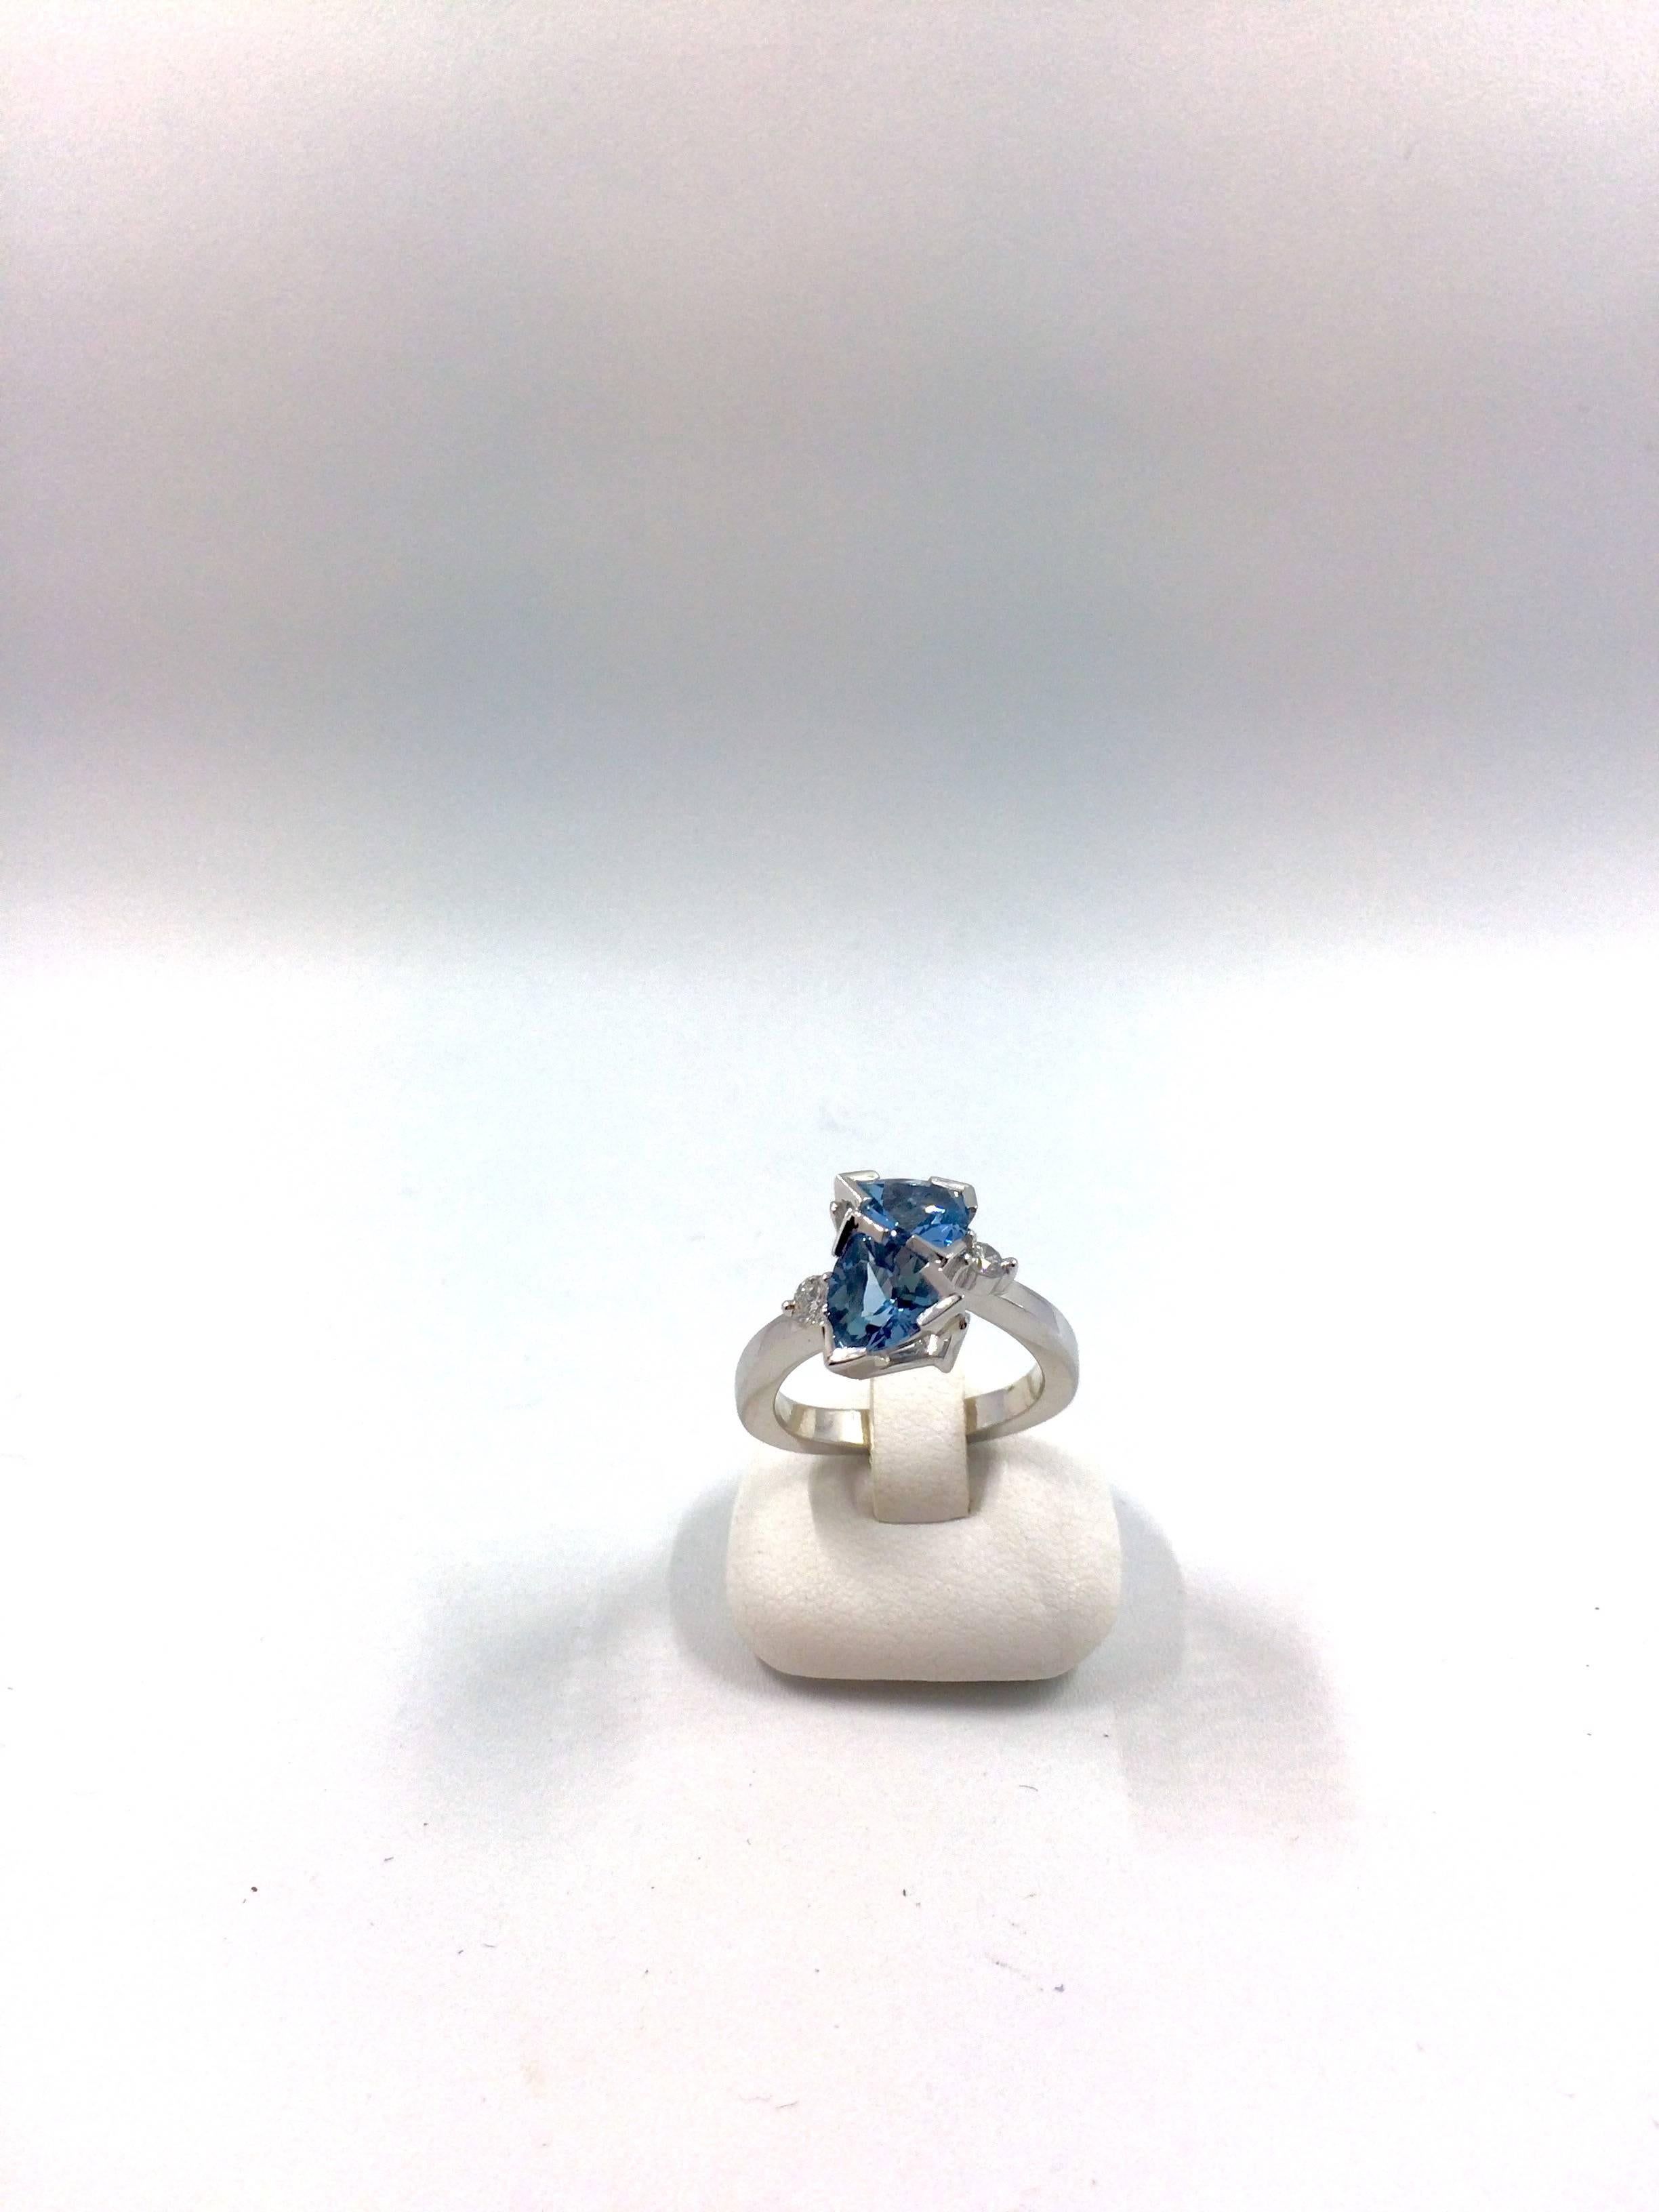 A white gold bypass ring set with two aquamarine and a brilliant cut diamond on each side. The ring is an unique creation entirely handmade.
Aquamarine Total Weight: 2.06 carat
Aquamarine Origine: Brasil
Diamonds Total Weight: 0.18 carat
Net Weight: